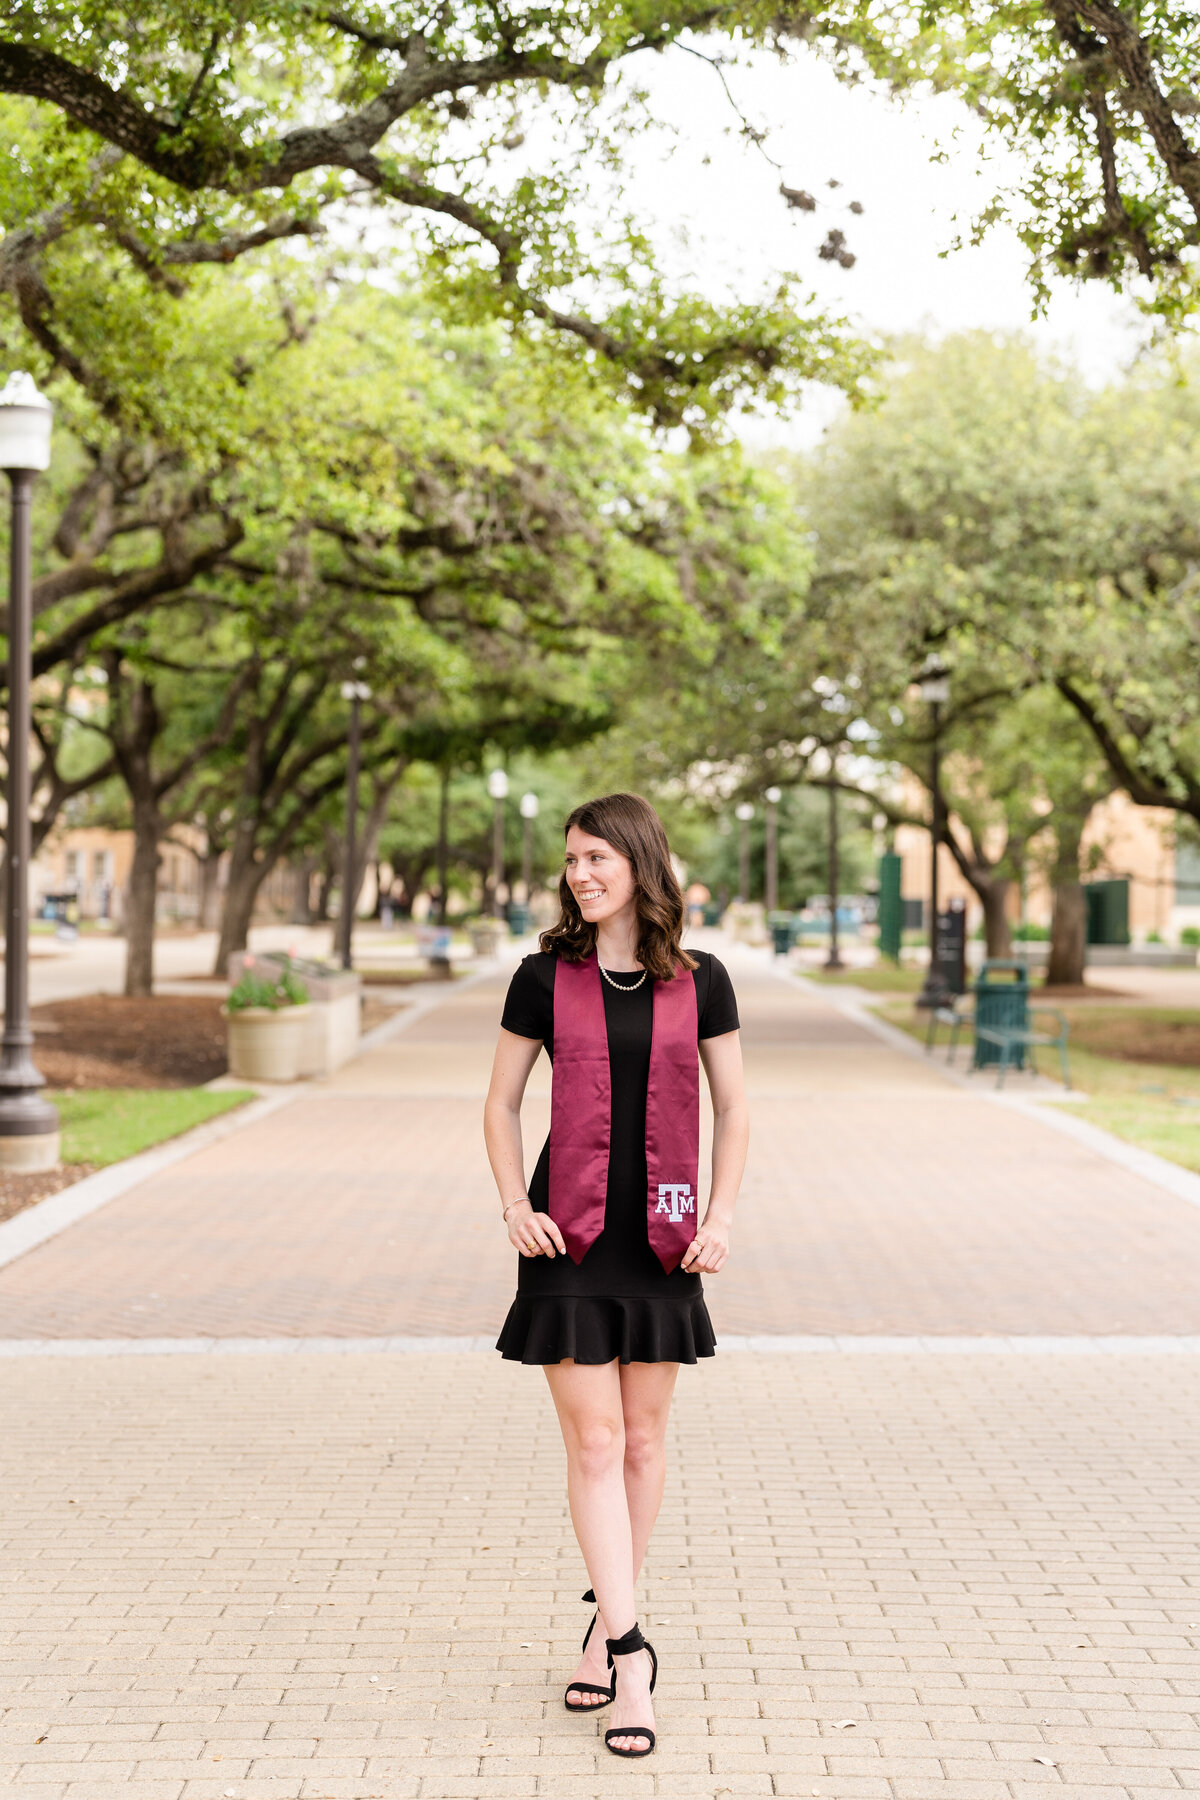 Texas A&M senior girl wearing little black dress and holding Aggie stole while smiling away under the trees of Military Plaza